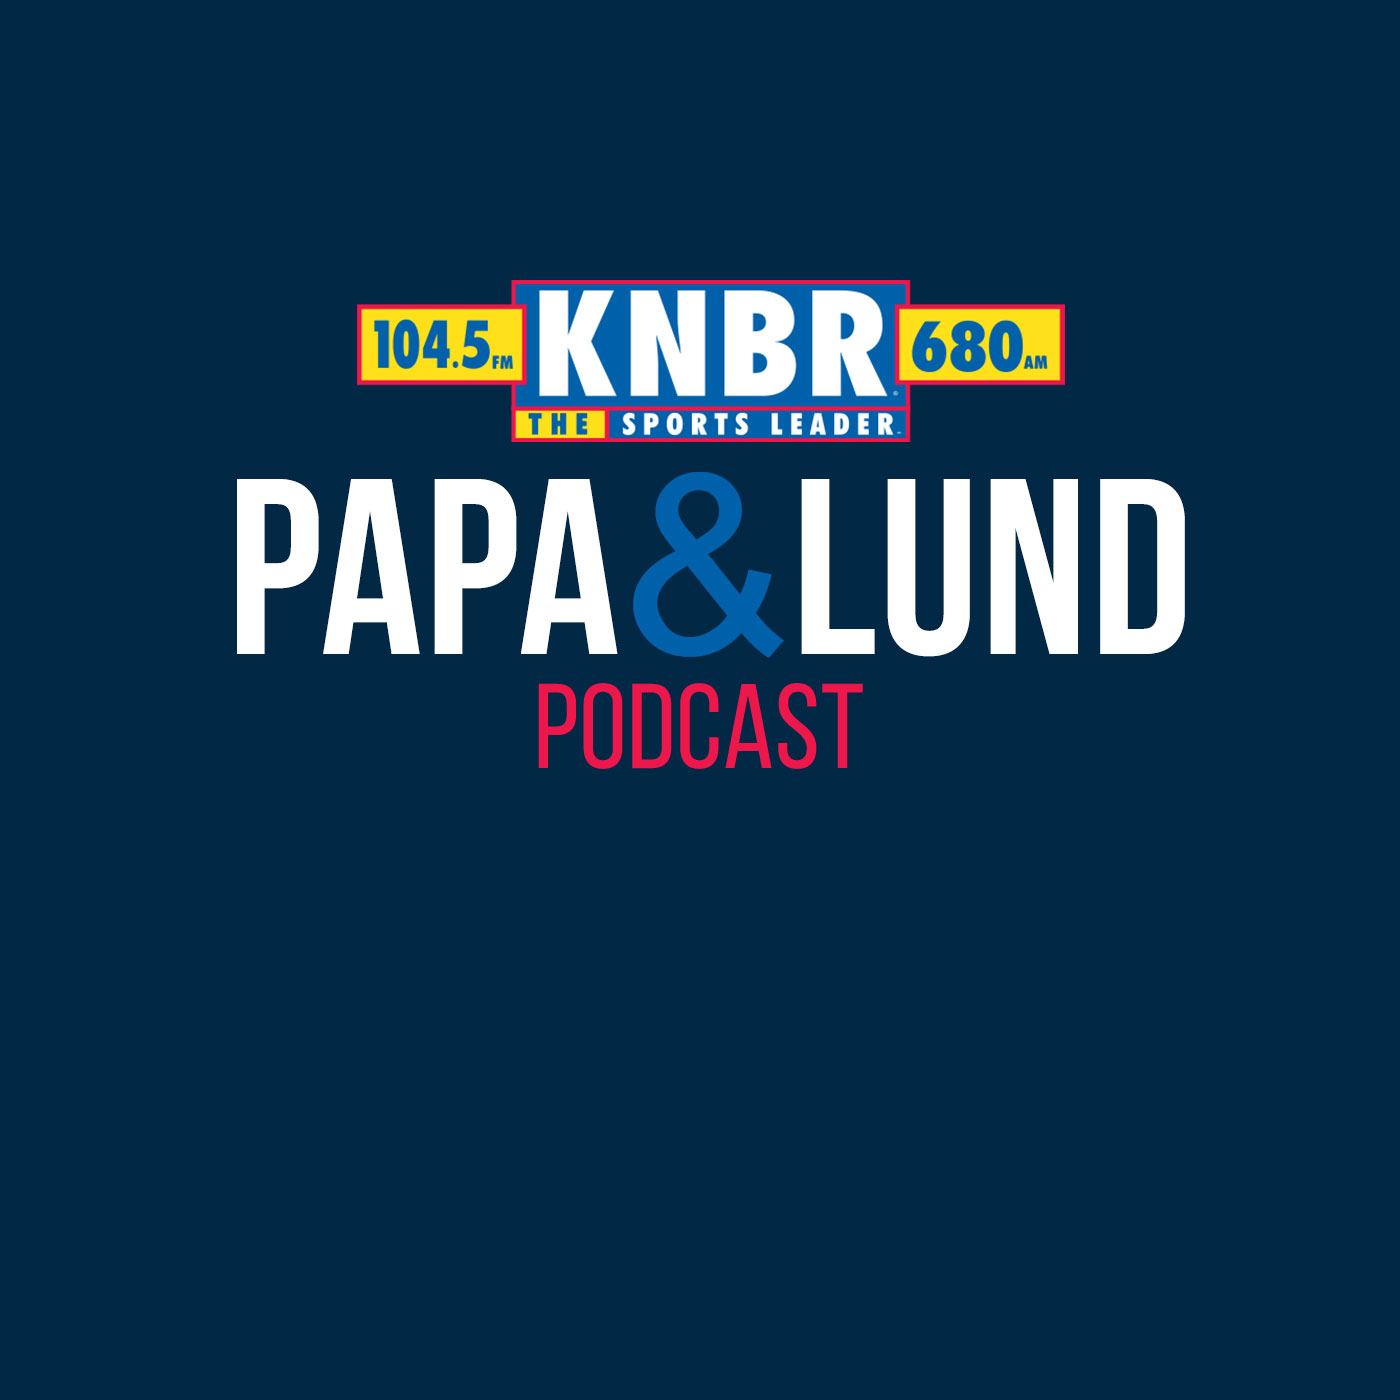 10-2 Susan Slusser joins Papa & Lund to discuss the circumstances that lead to the Giants moving on from Gabe Kapler, Brandon Crawfords farewell as well as who could be next in line to be the next skipper of the Giants